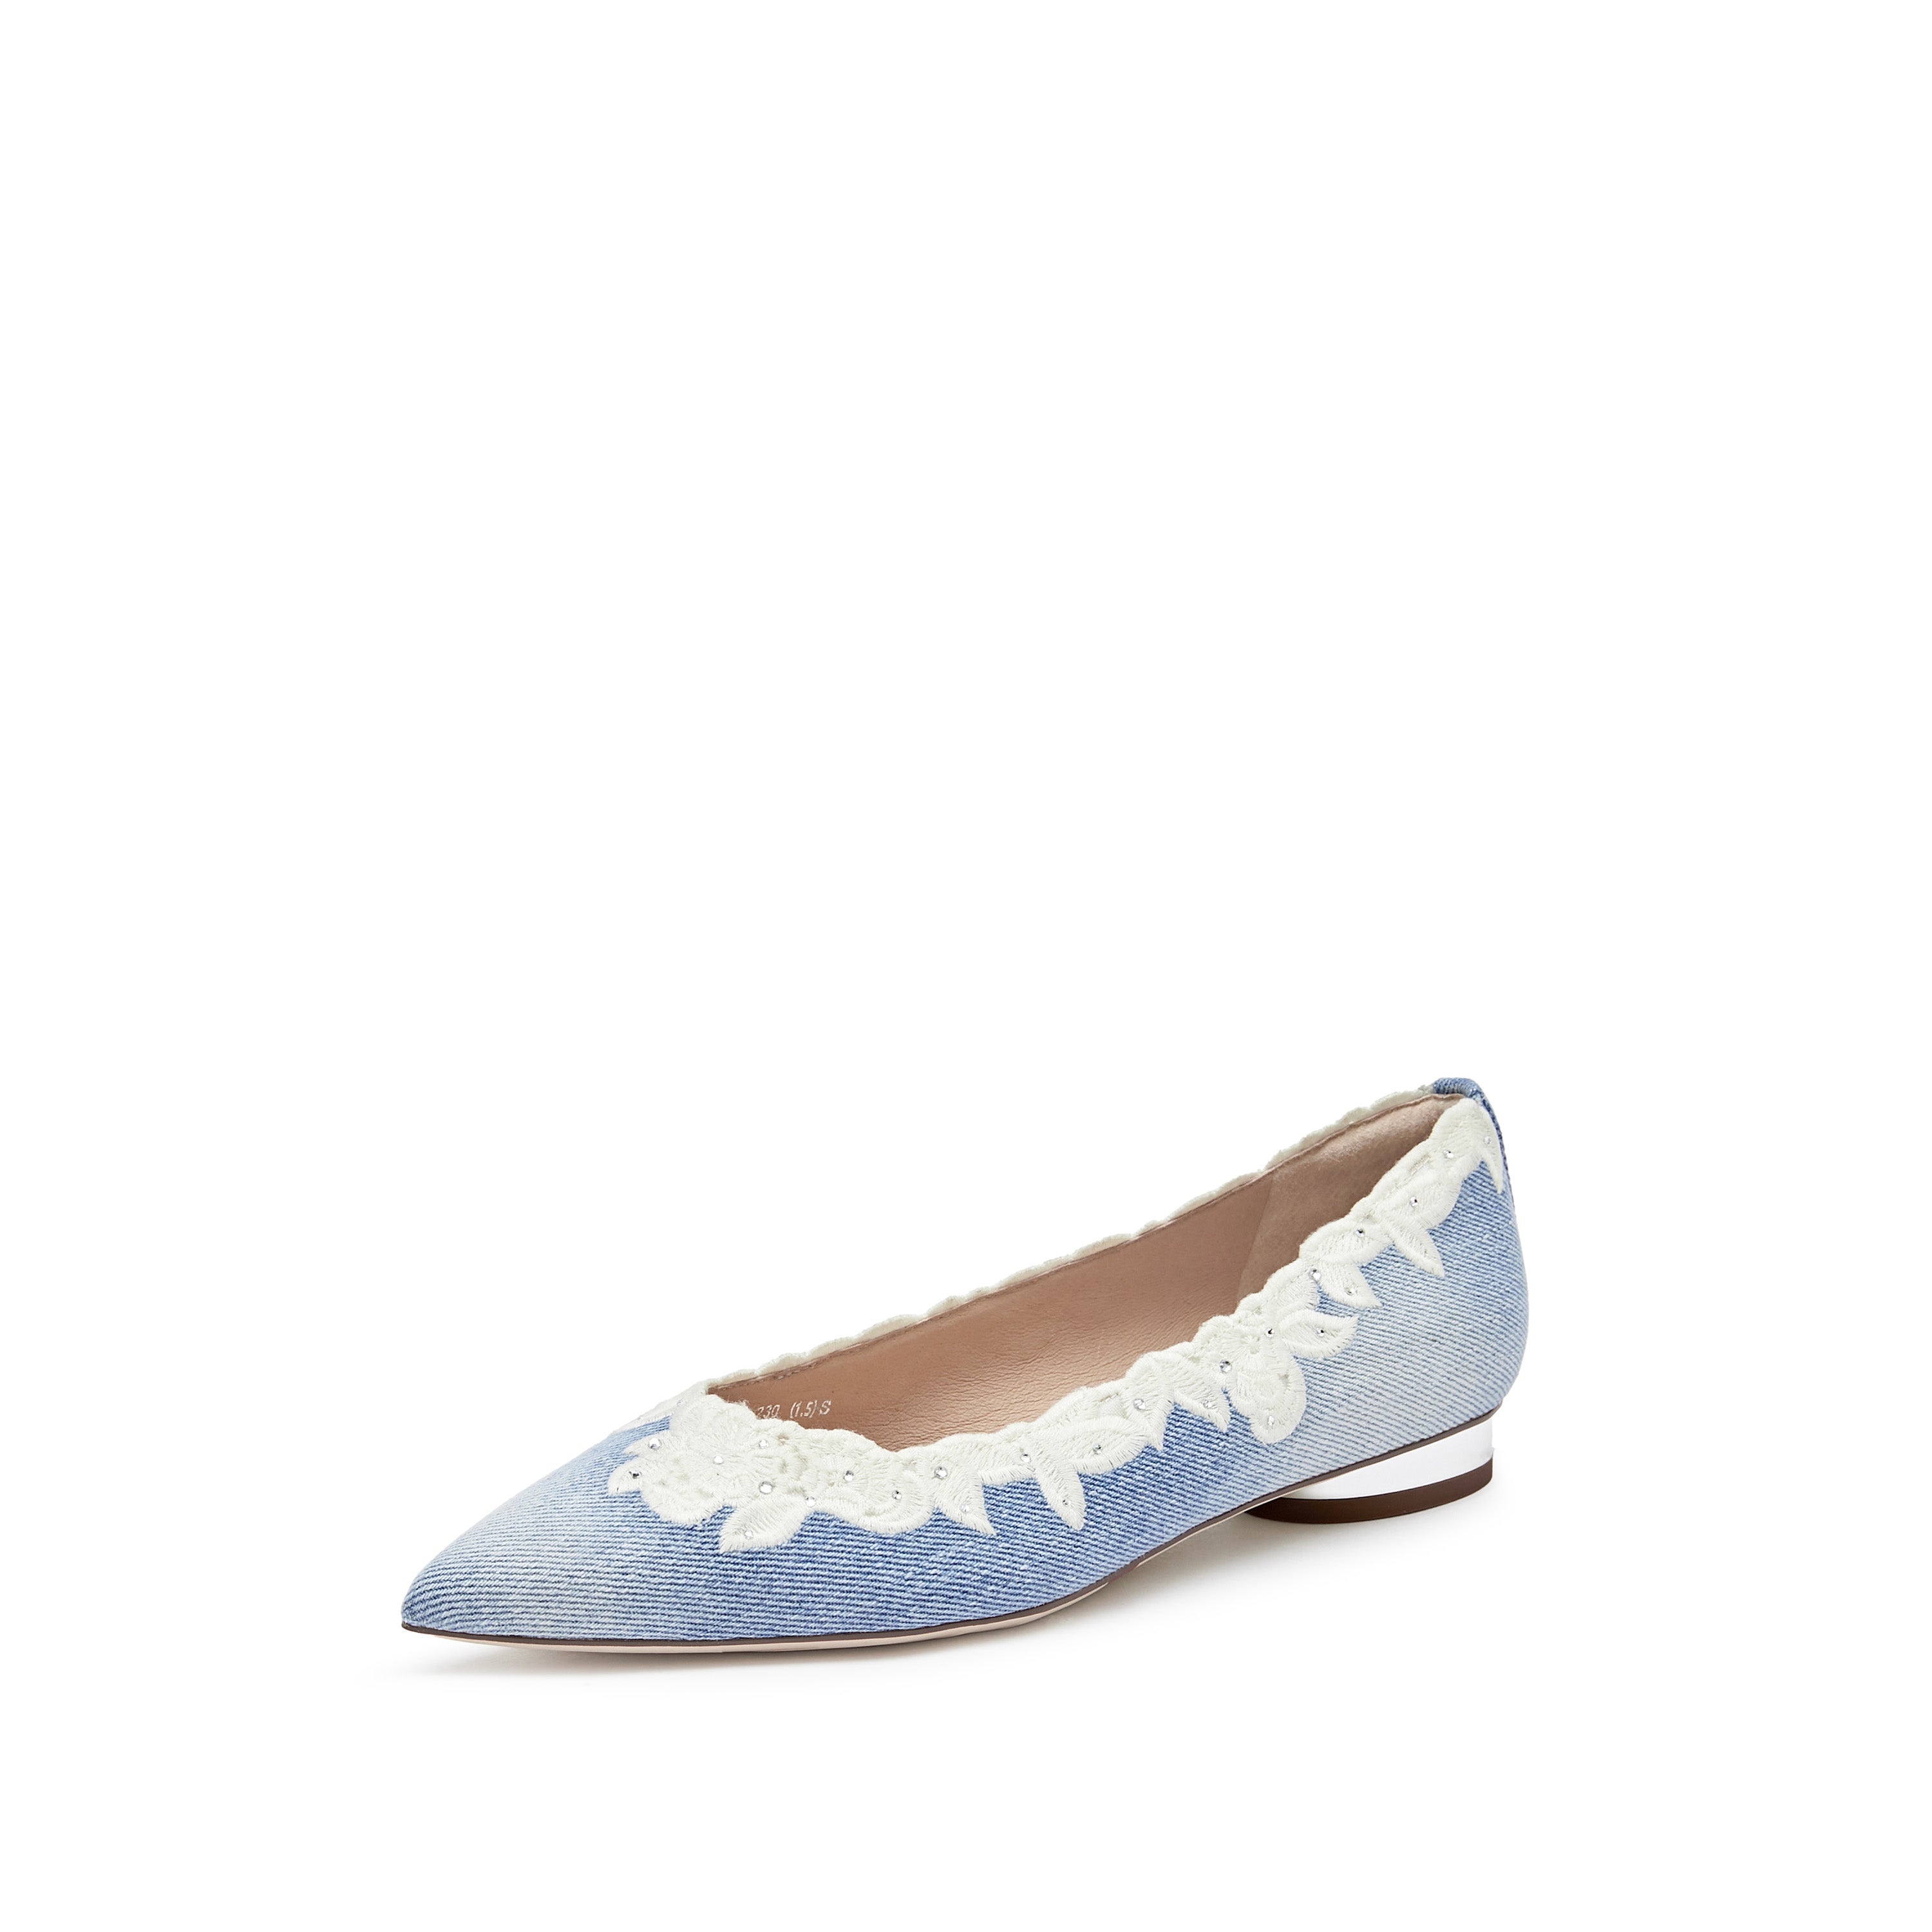 Denim Lace Crystal Pointy Flats